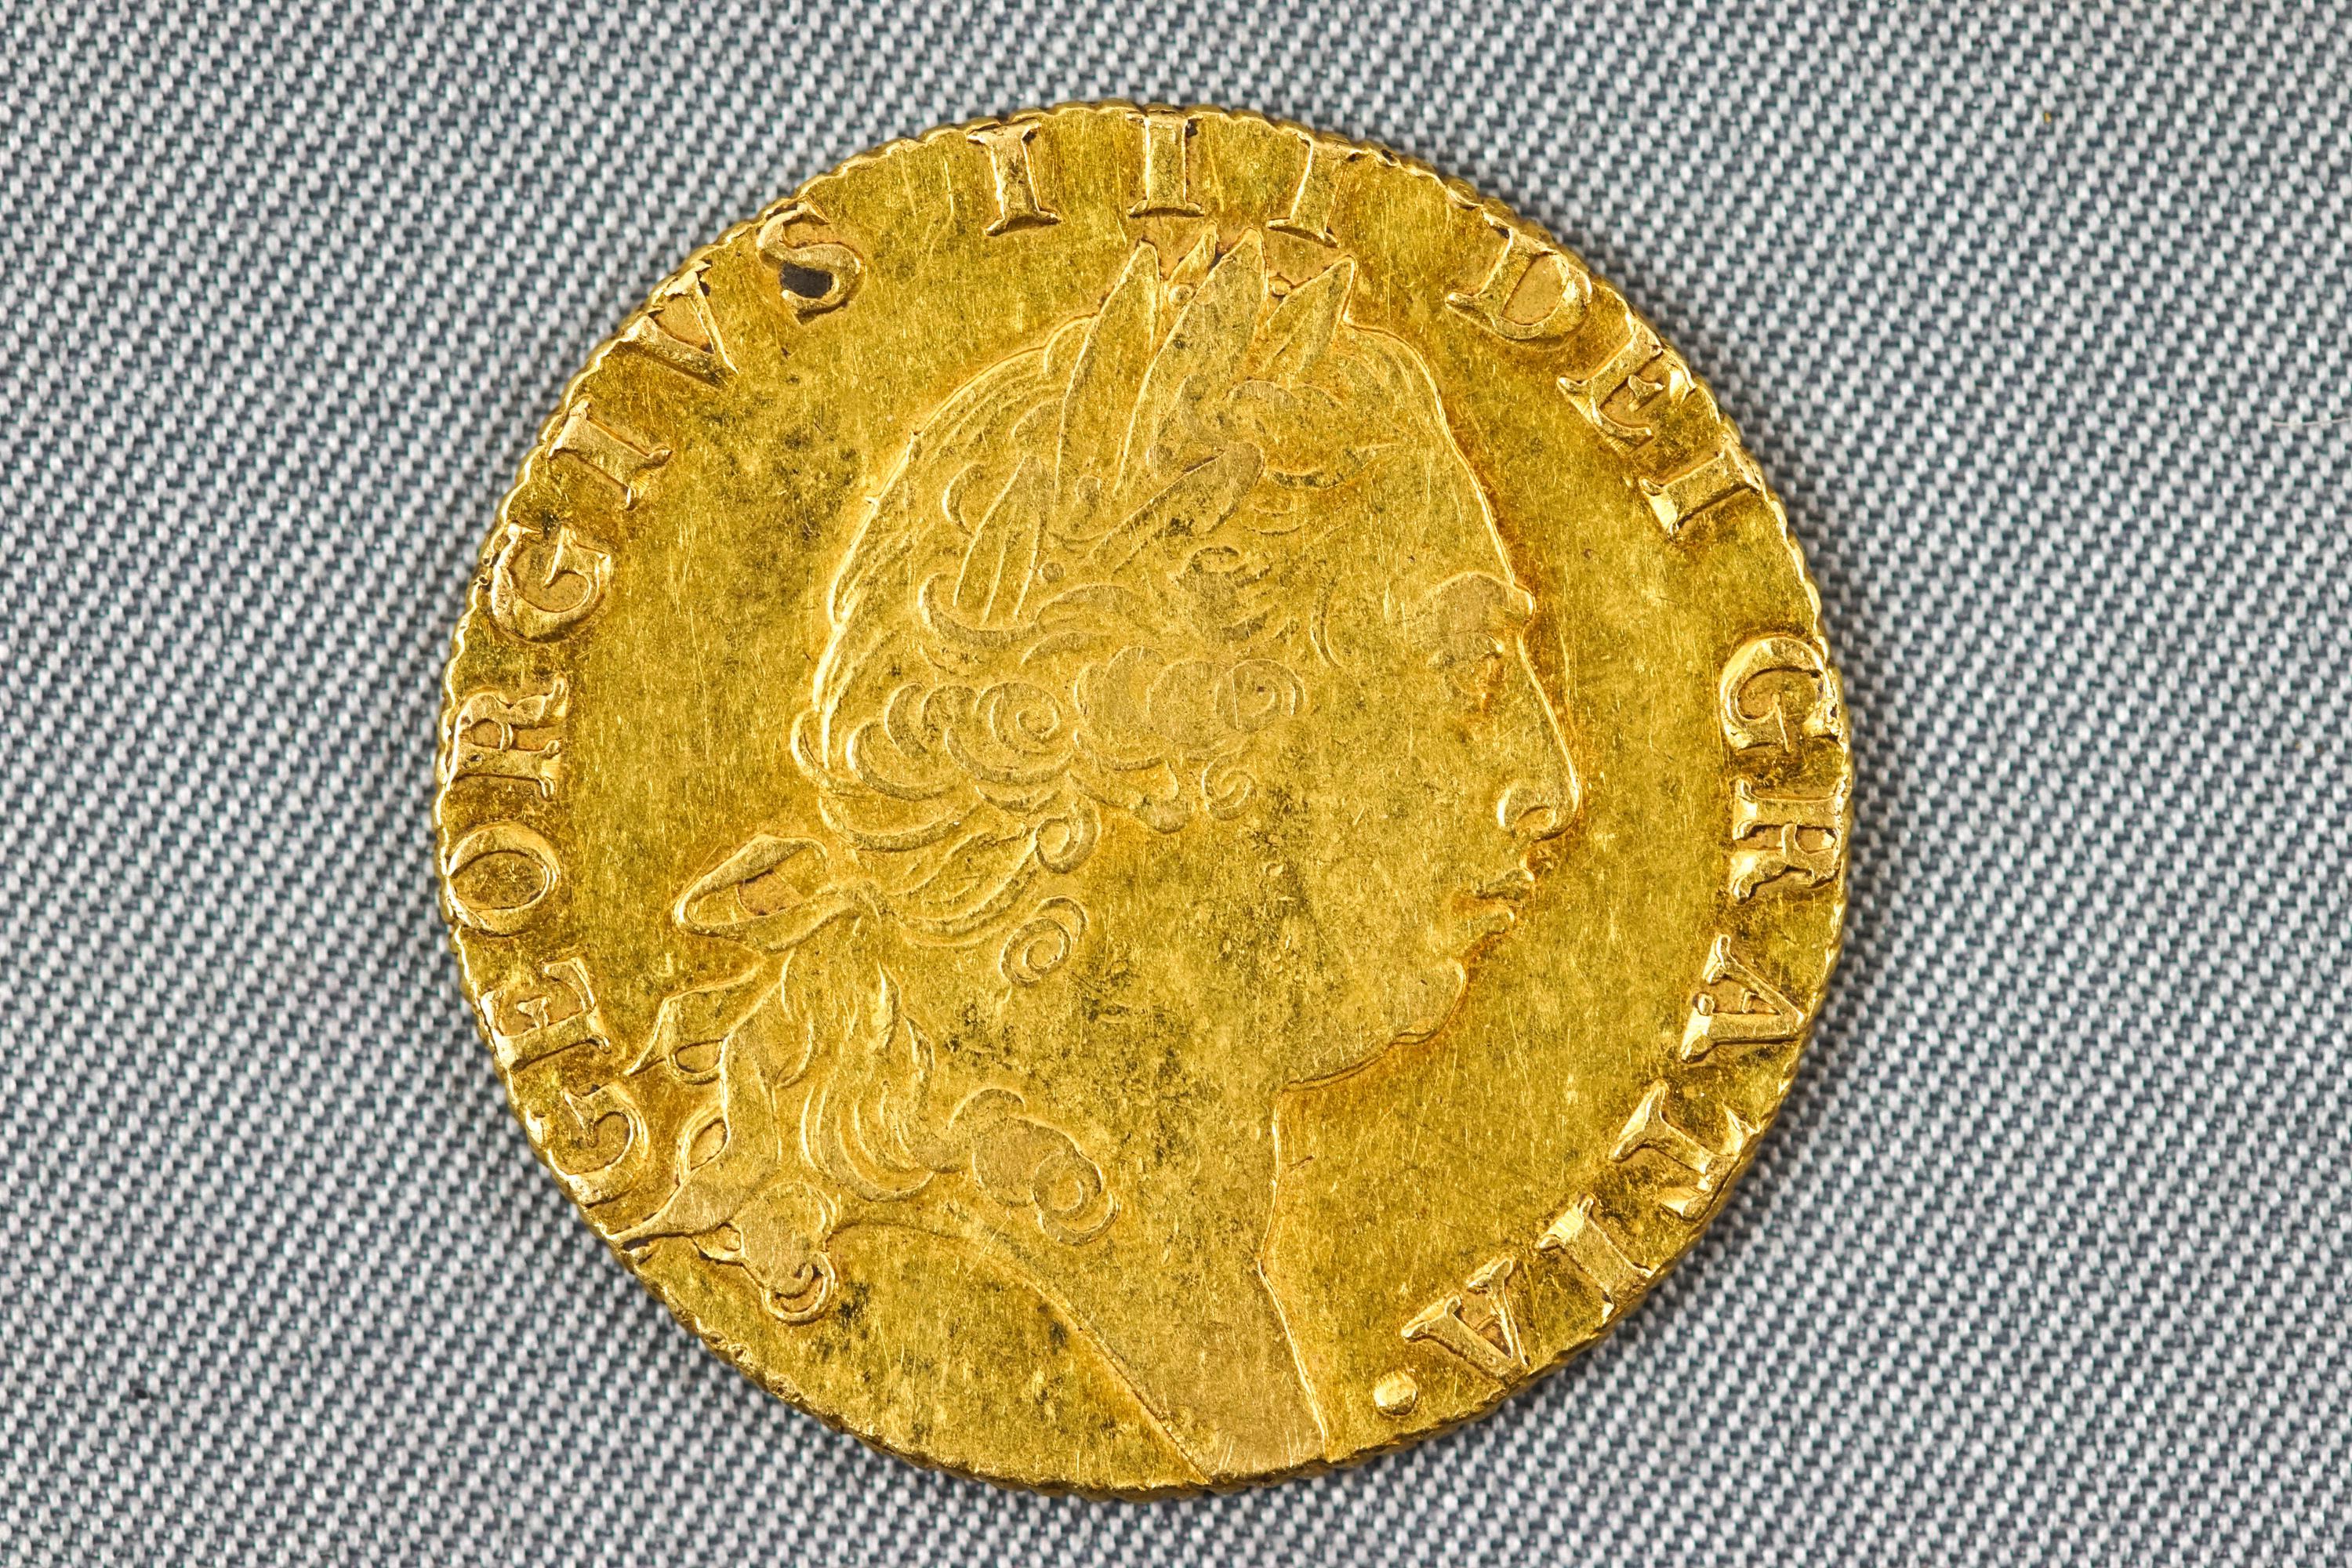 A loose George III shield sovereign, dated 1794.